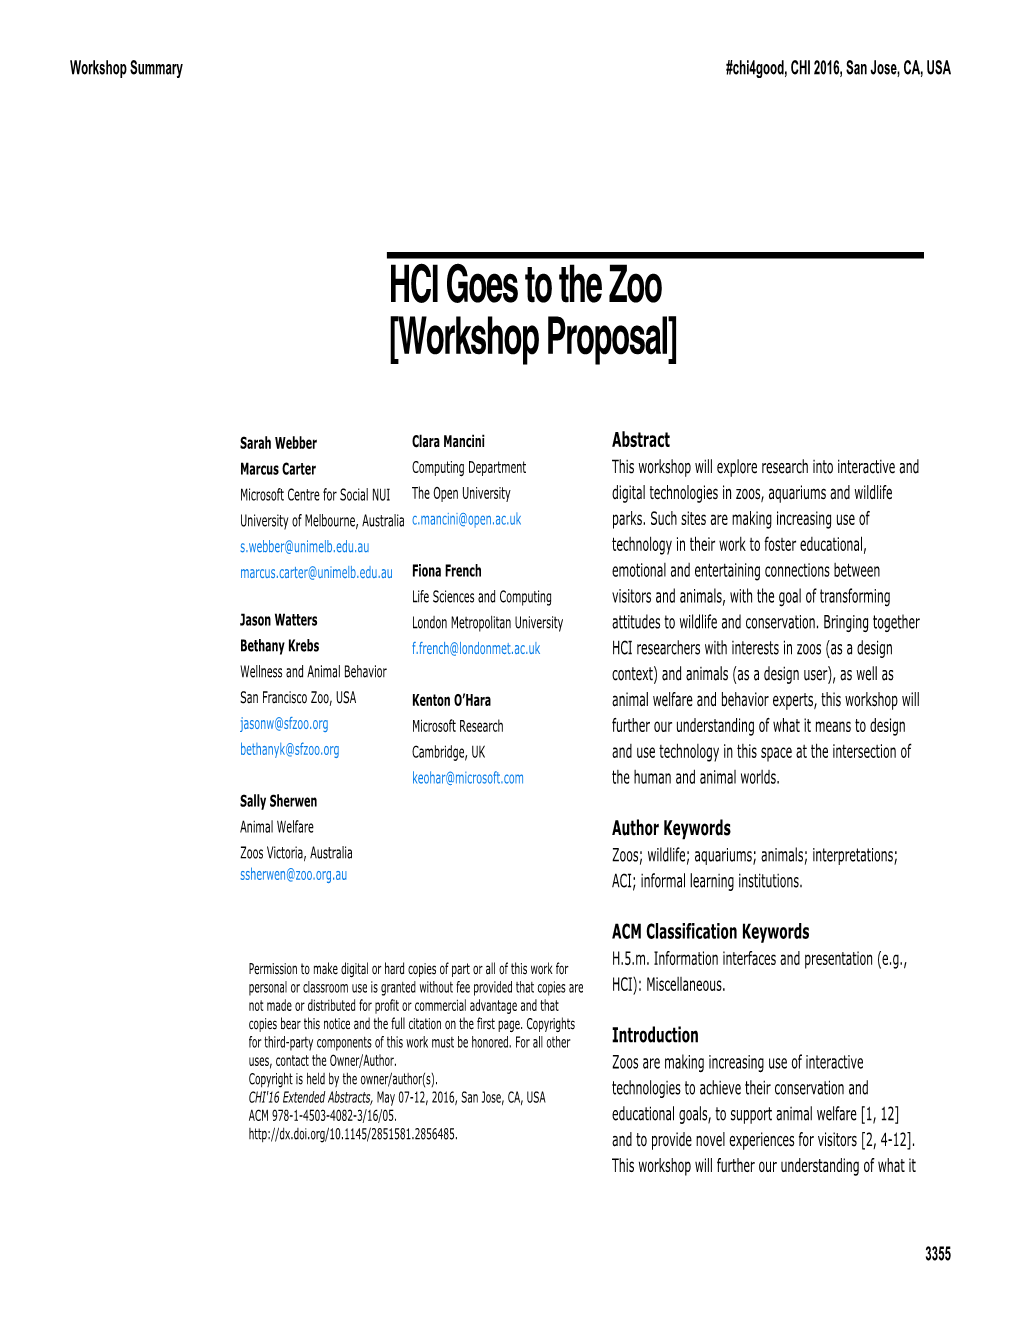 HCI Goes to the Zoo [Workshop Proposal]